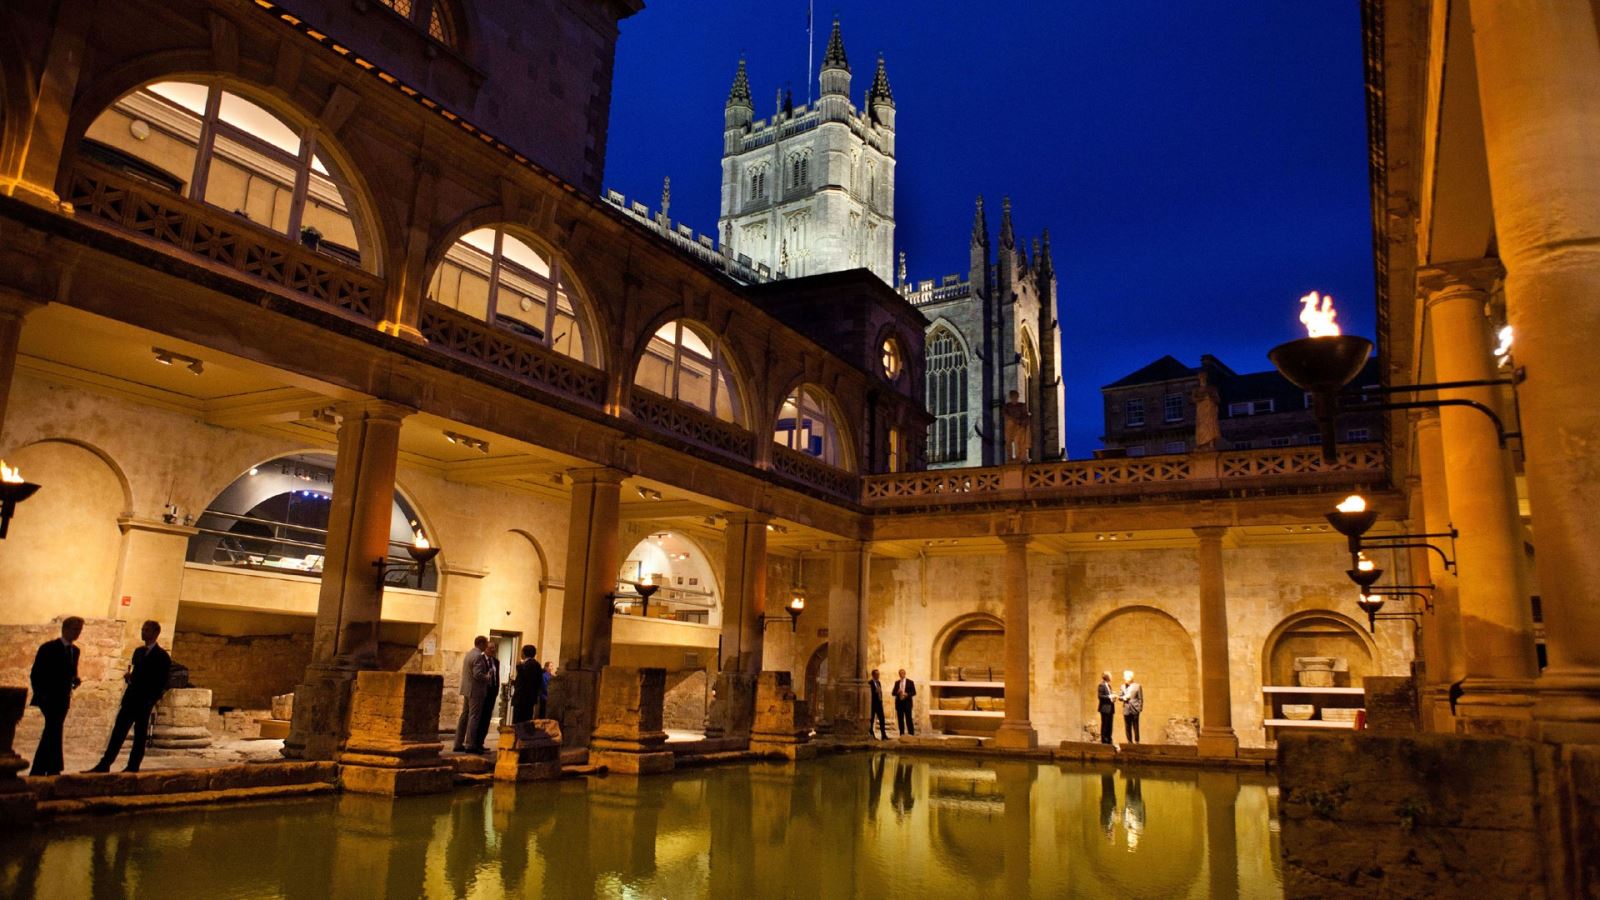 Event guests drinking by the Great Bath at the Roman Baths